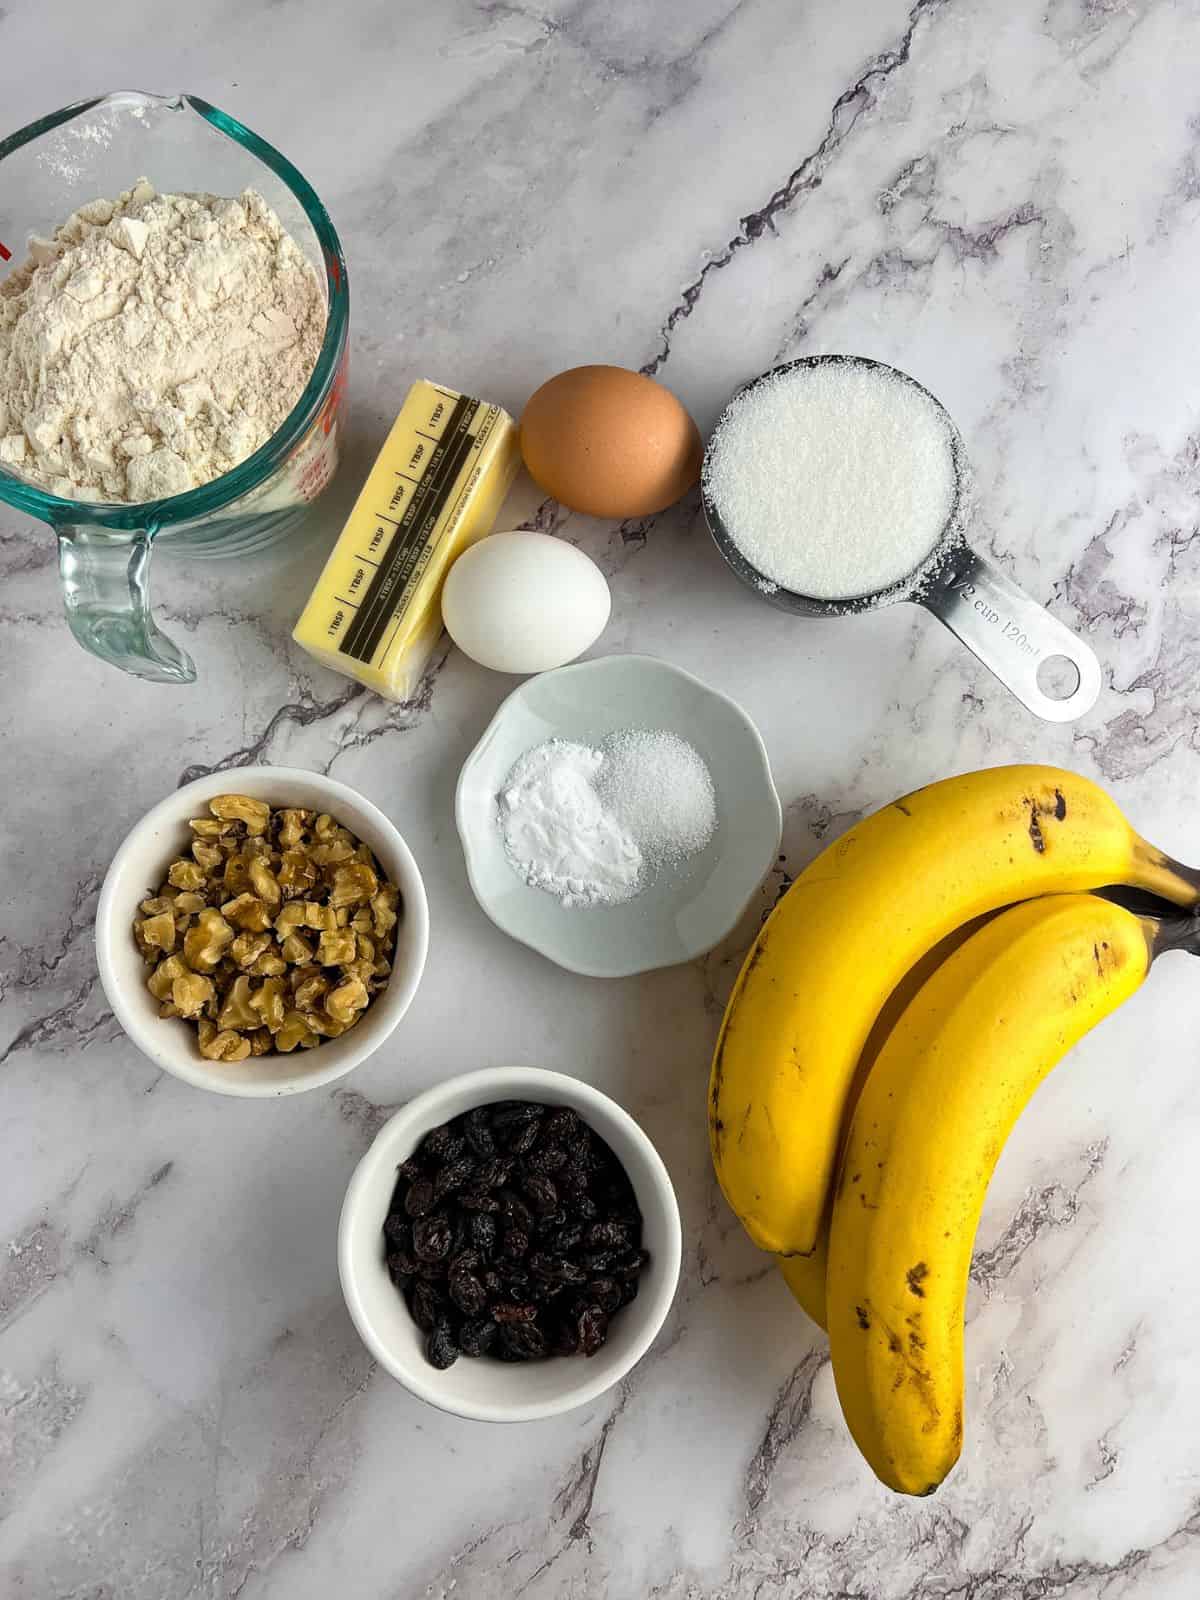 Ingredients for banana bread with walnut and raisin.